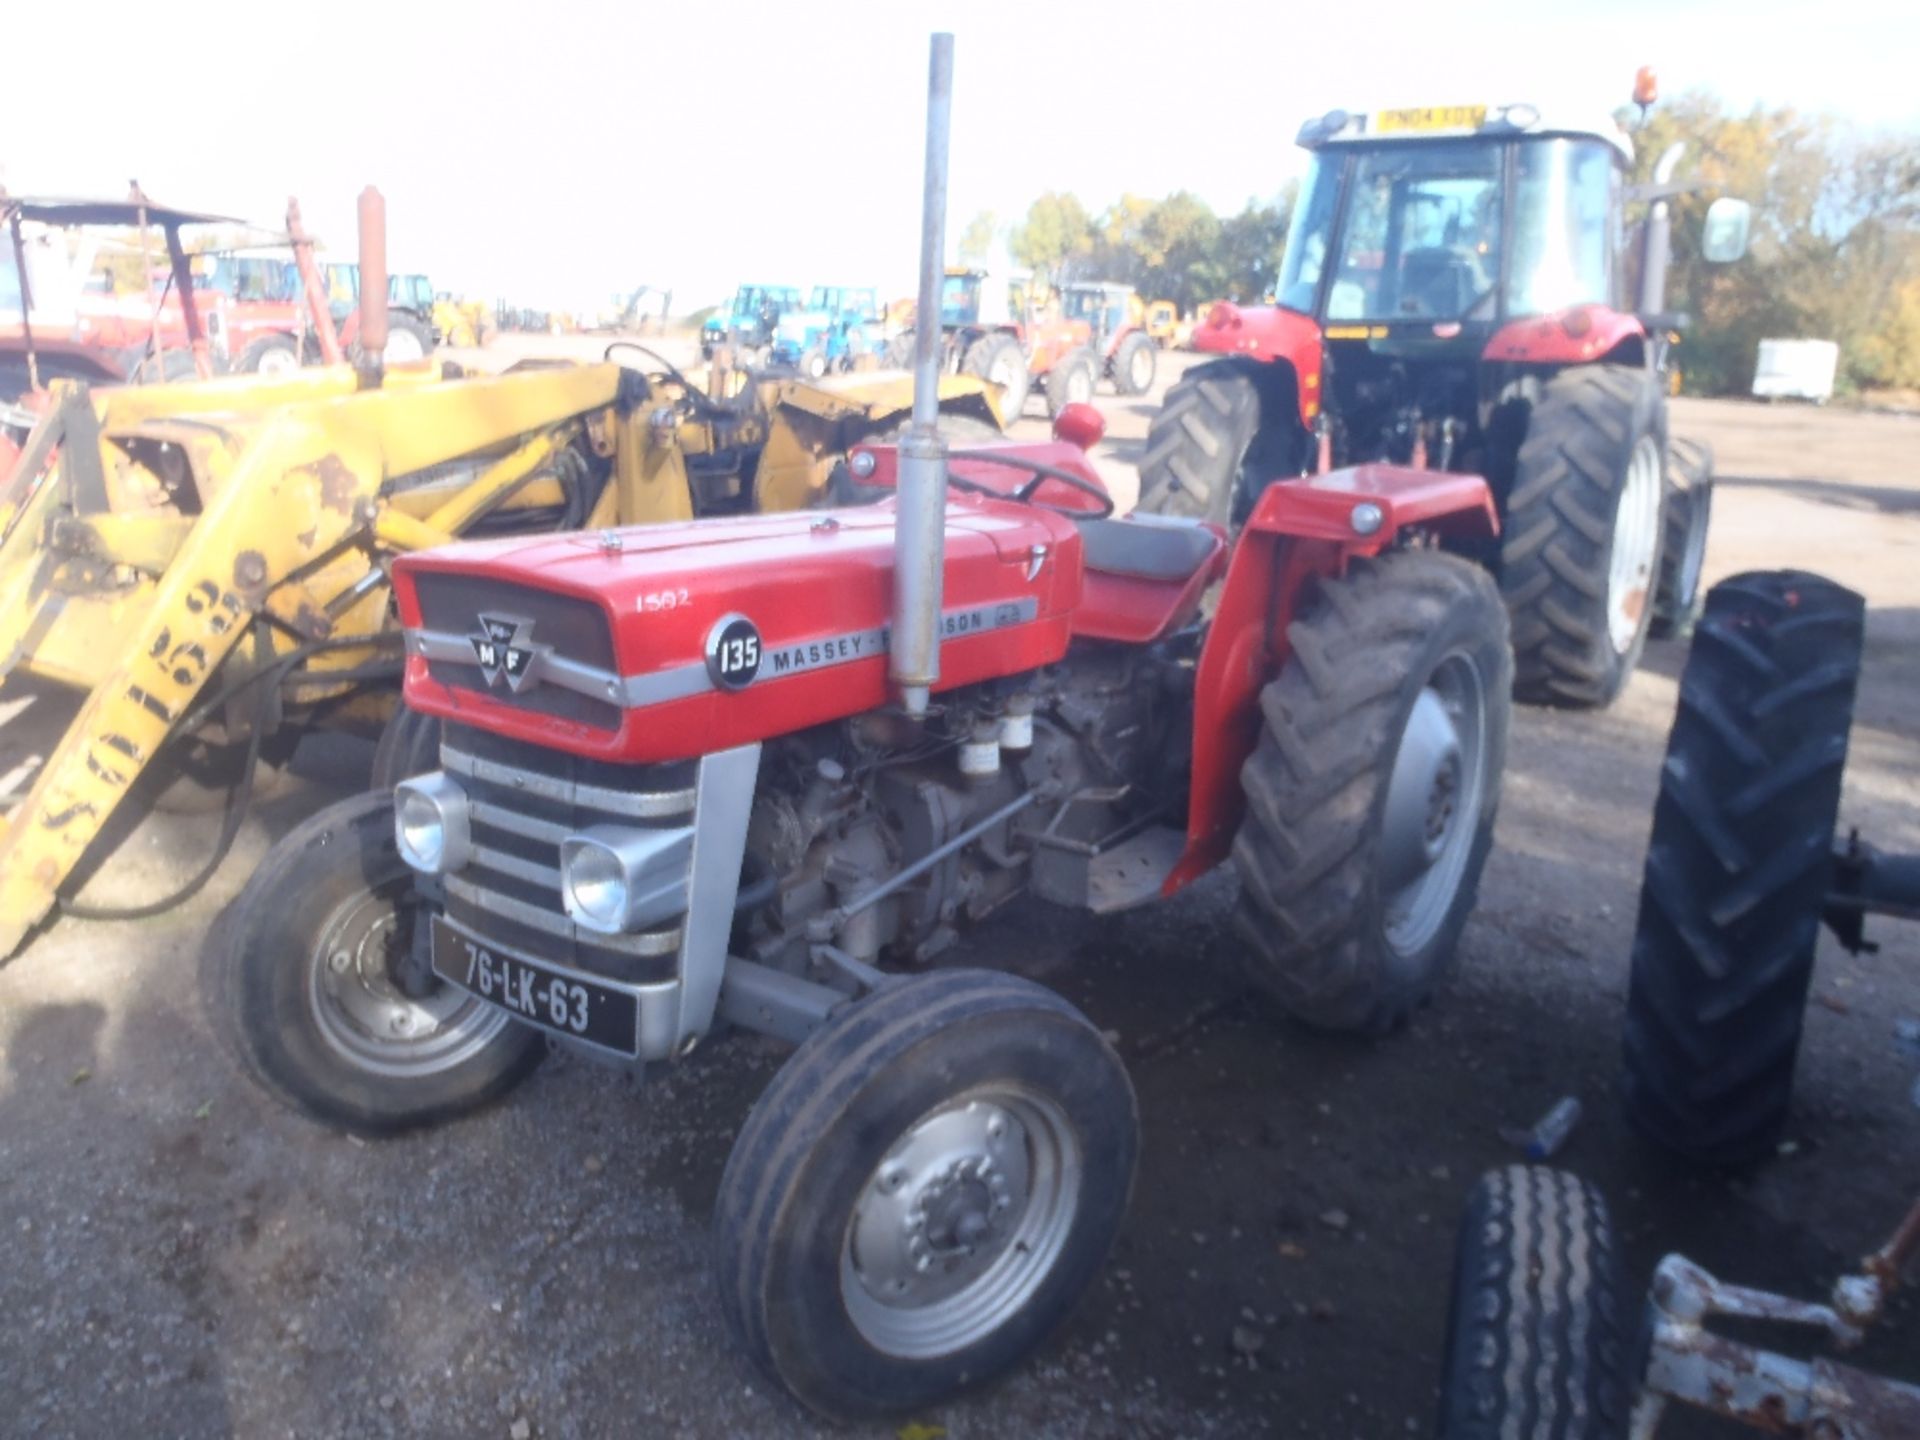 1976 Massey Ferguson 135 3 Cylinder Diesel Tractor. Goodyear Tyres, Long PTO, Cat 2 Lift Arms & Pick